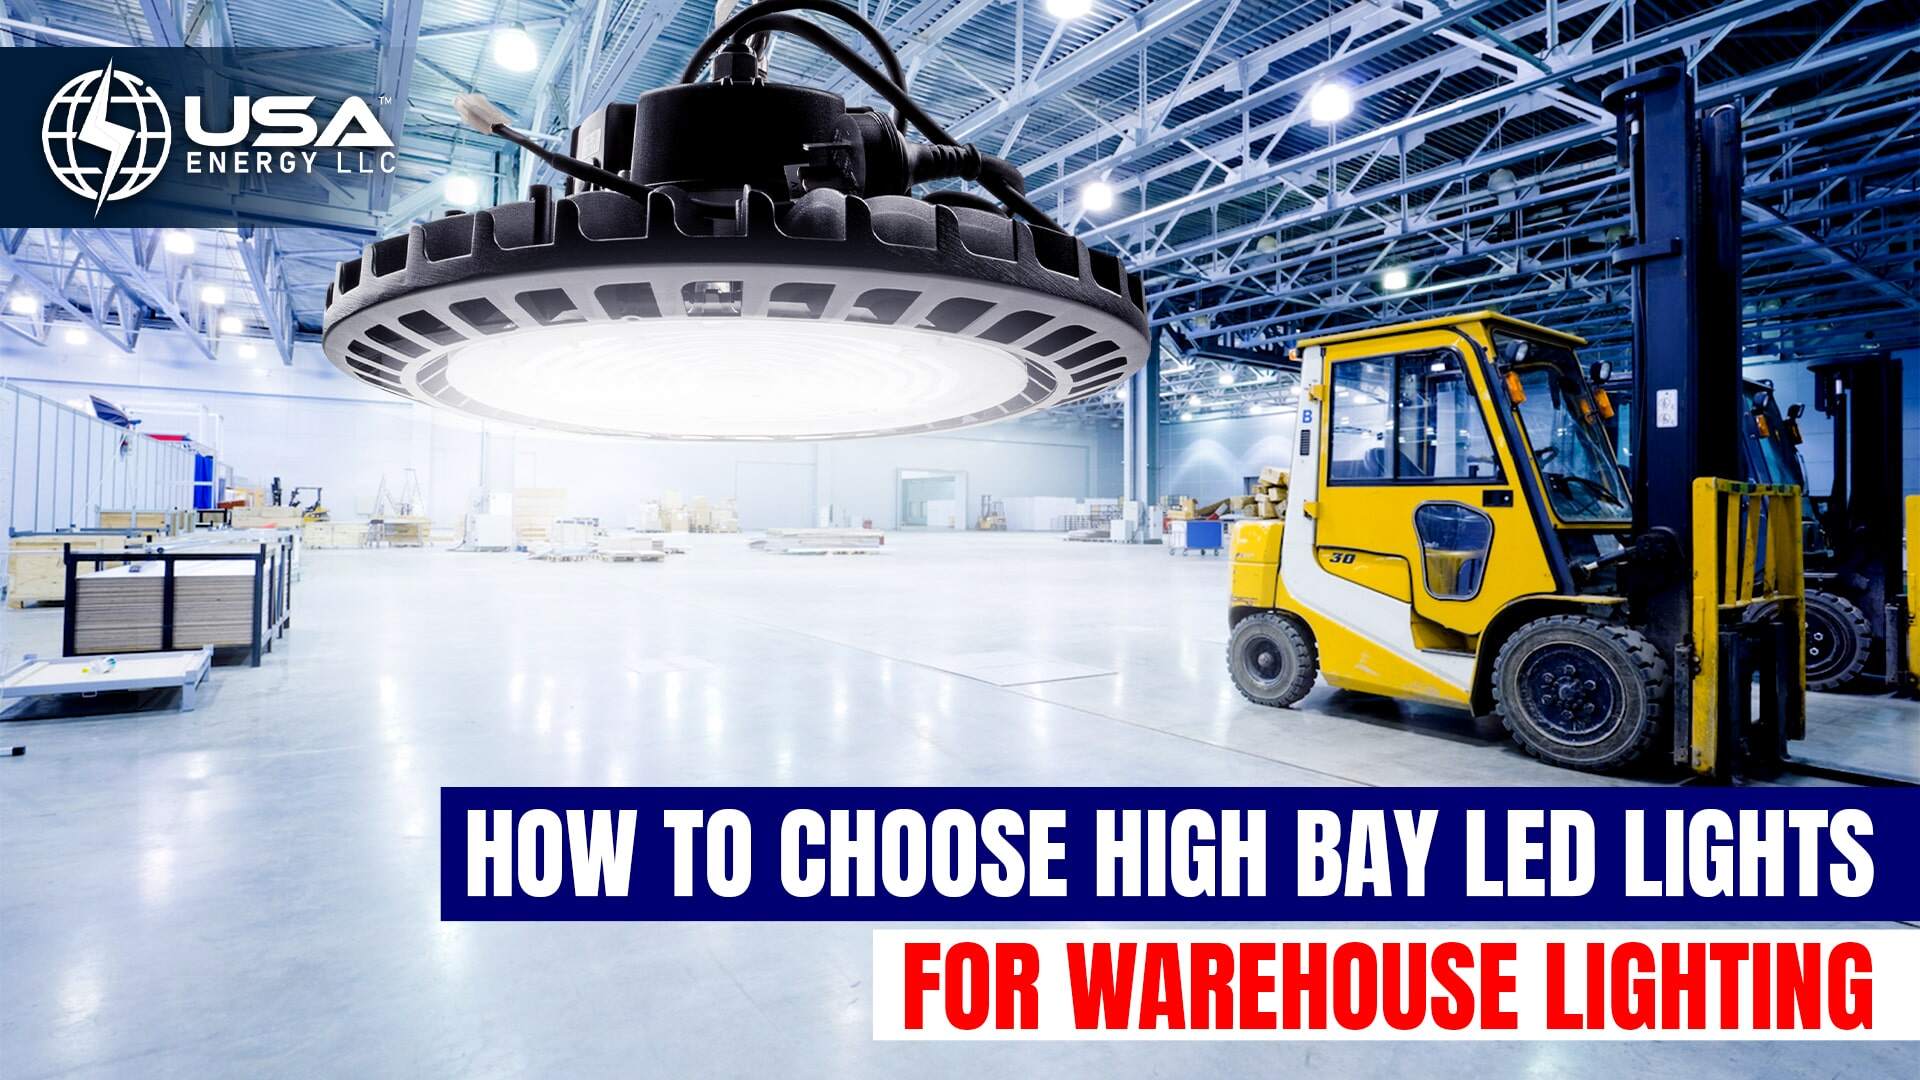 How to Choose High Bay LED Lights for Warehouse Lighting